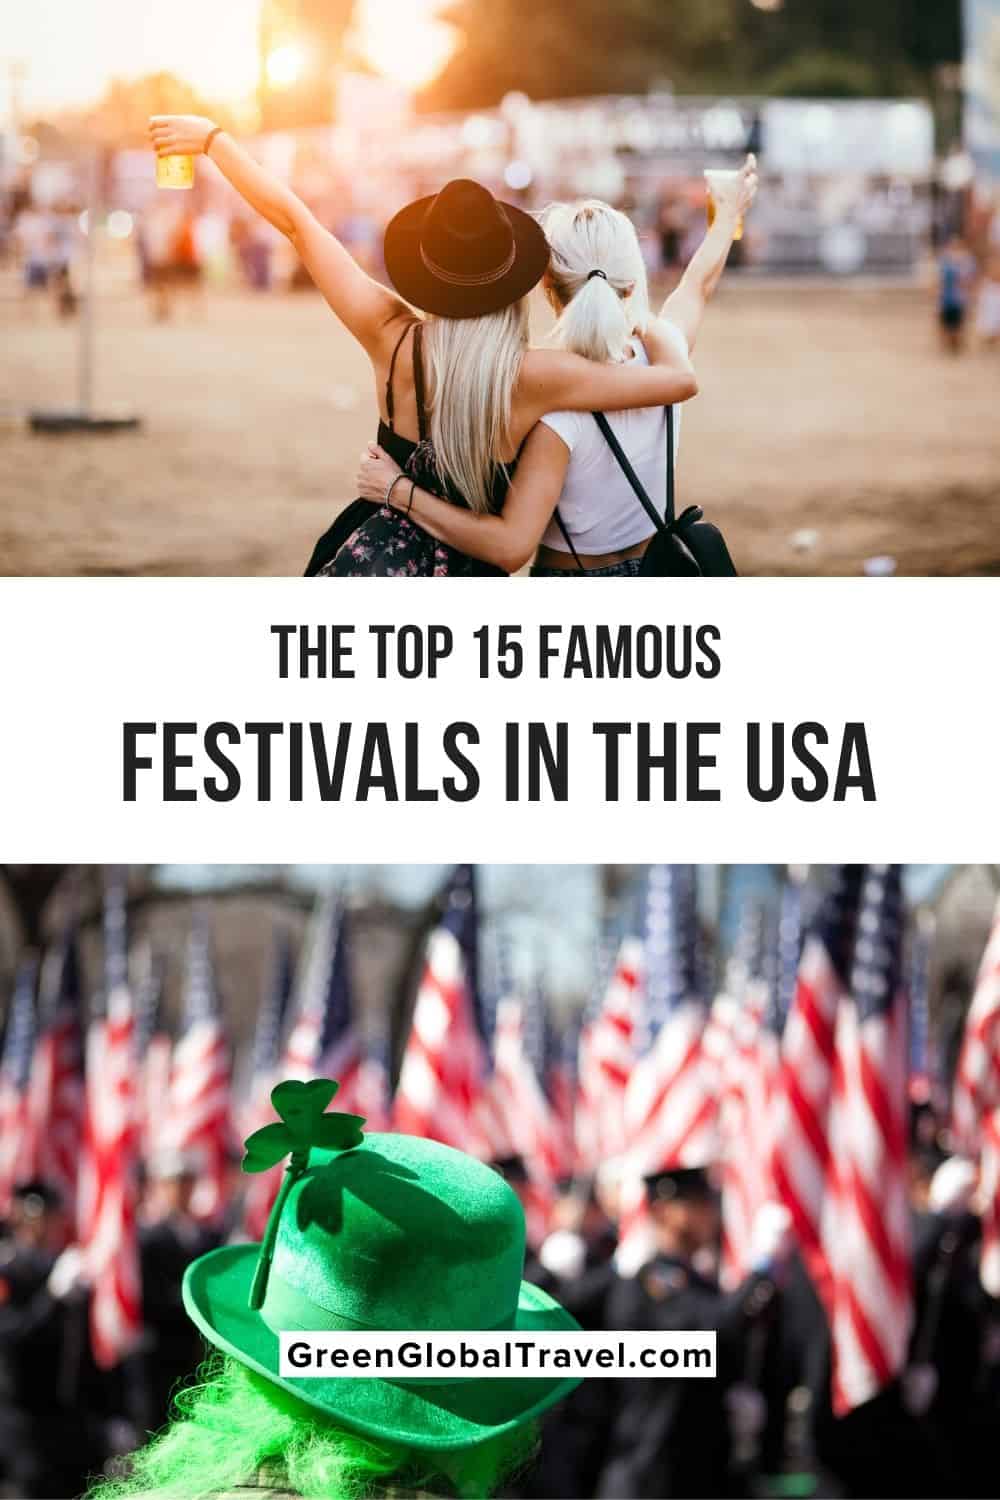 The Top 15 Famous Festivals in the USA, from holiday celebrations like Mardi Gras and St. Patrick's Day in Savannah to Bonnaroo, Burning Man and more.